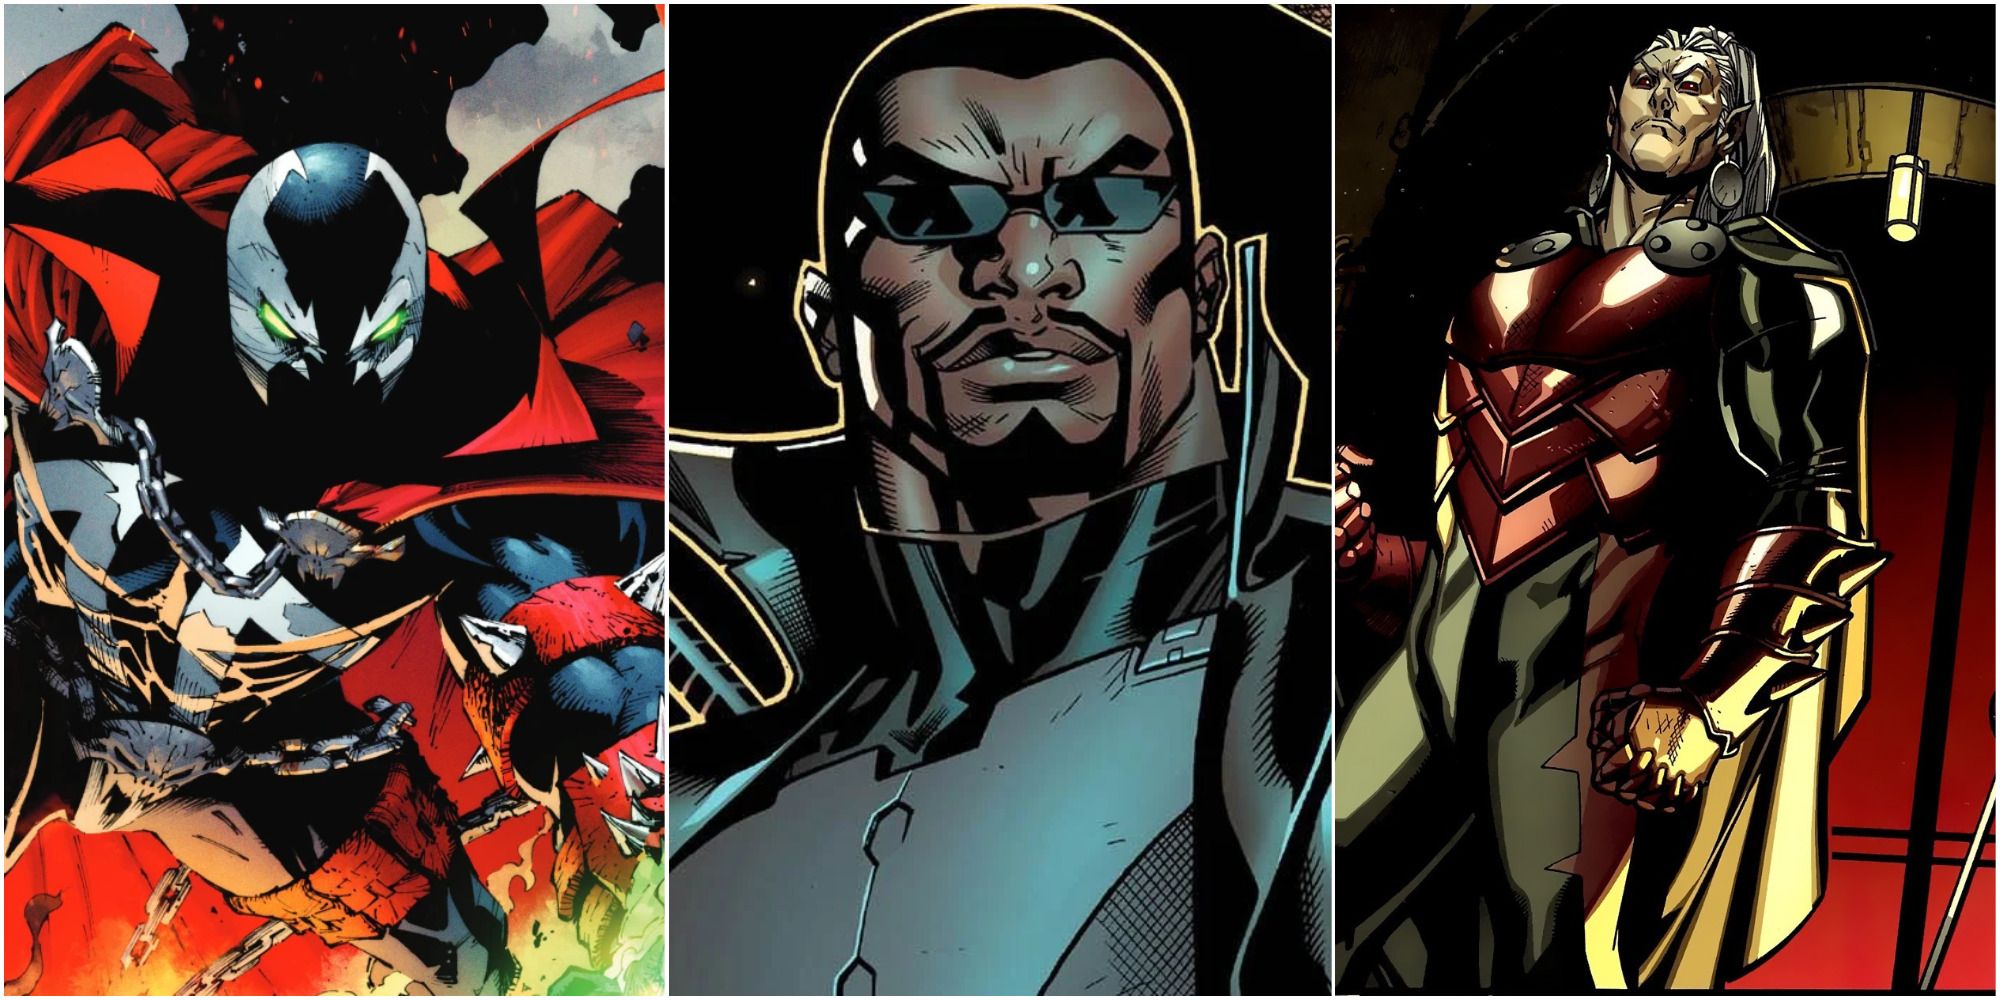 Spawn, Blade, and Marvel's Dracula